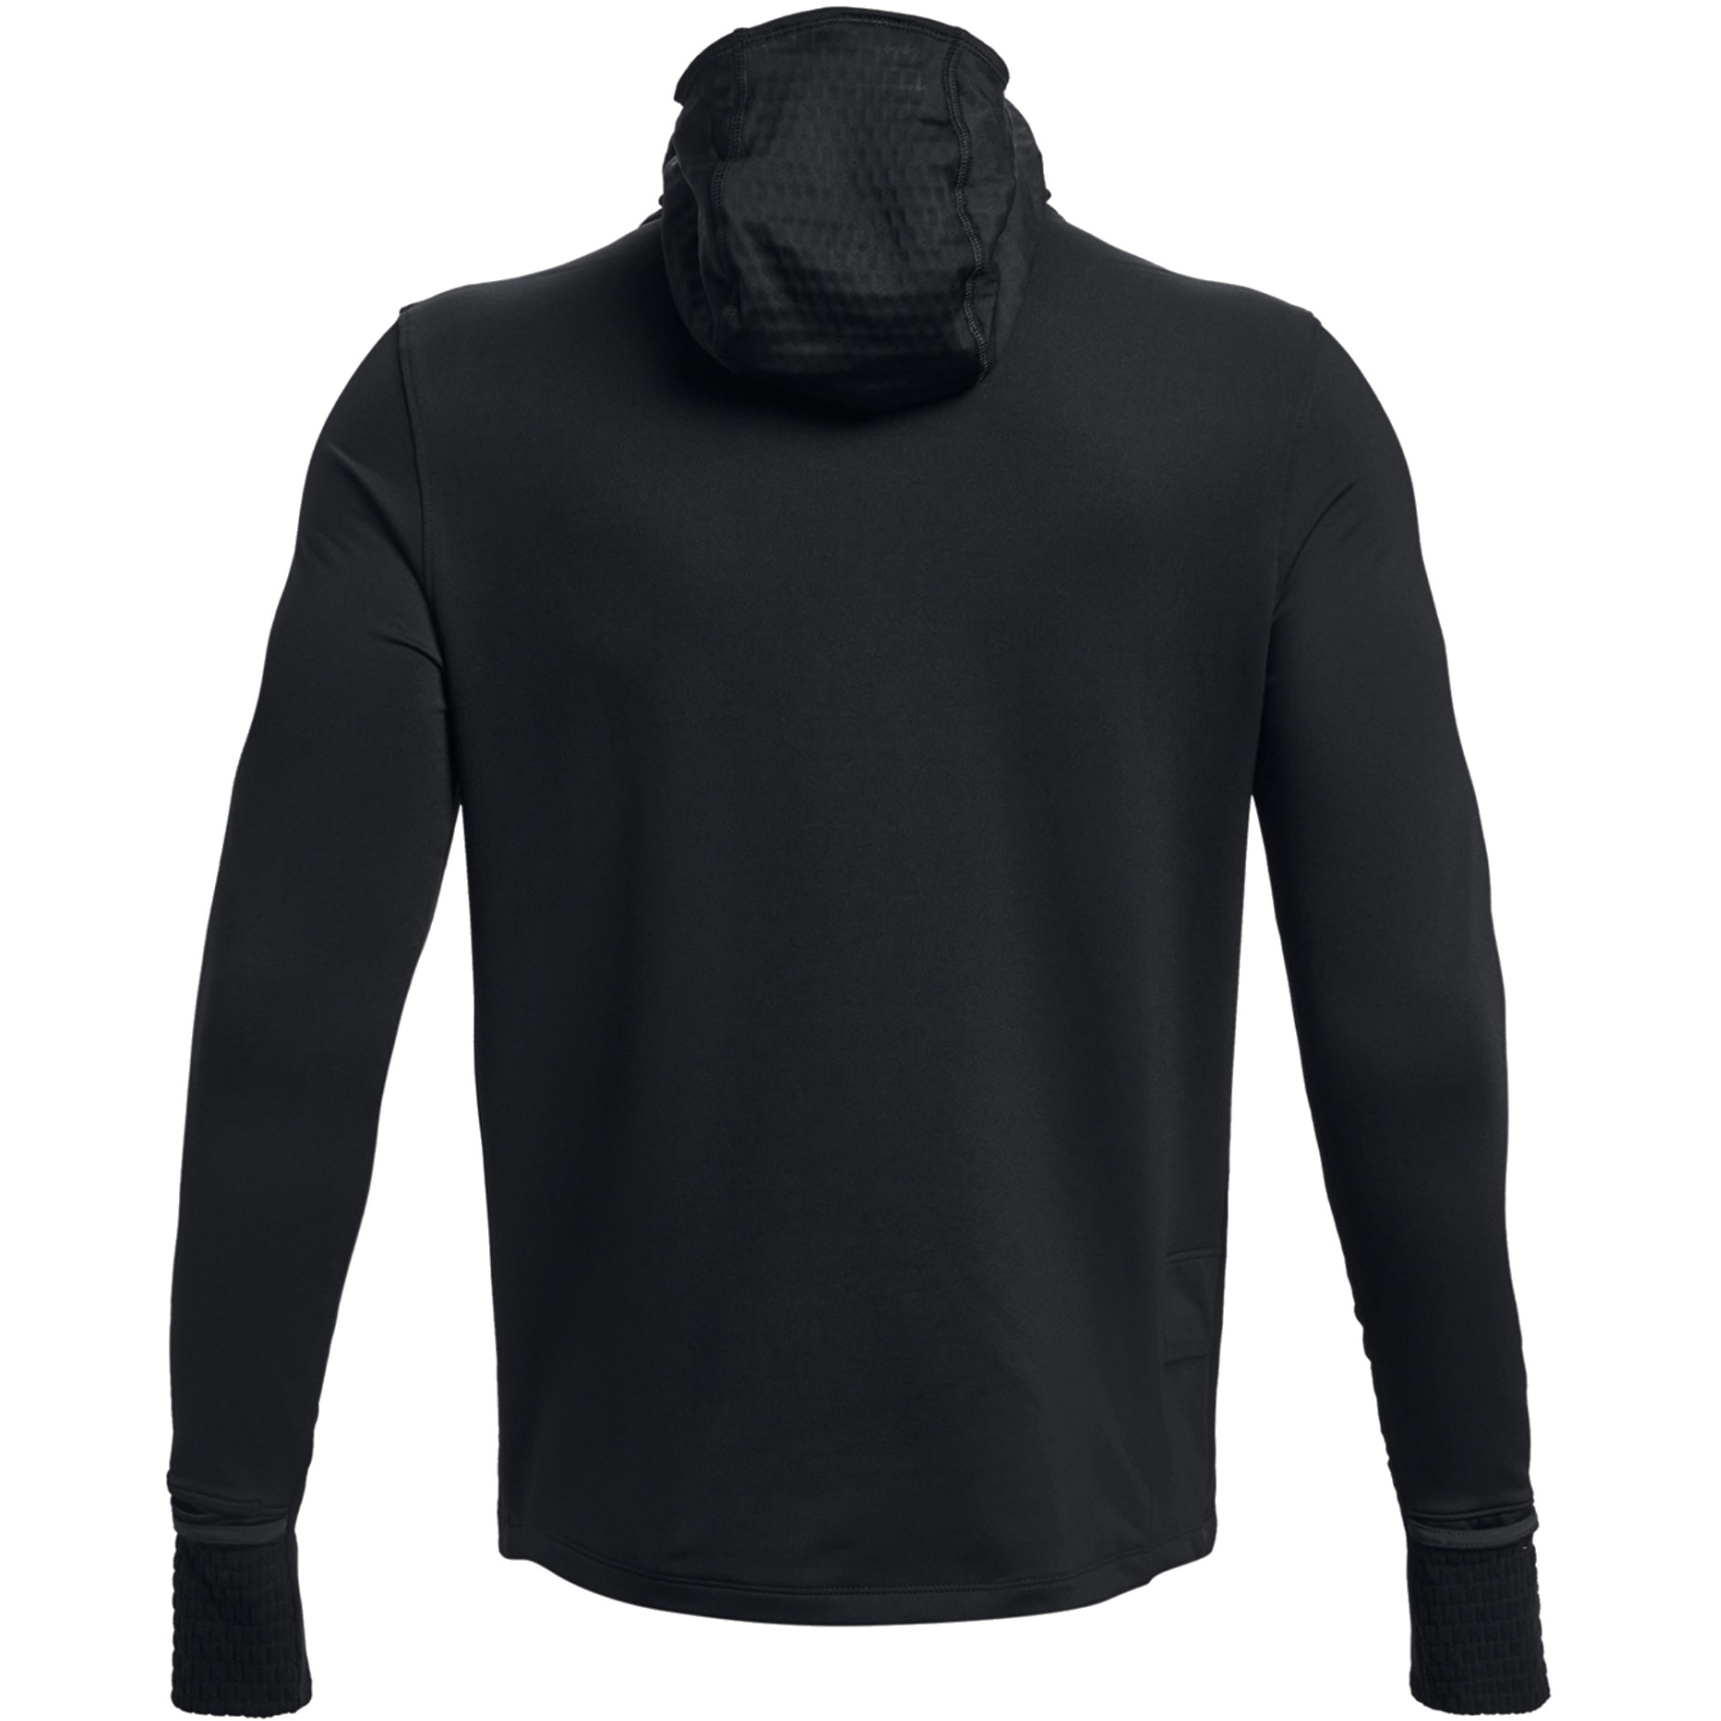  Under Armour Men's Storm ColdGear Balaclava, Black (001)/Pitch  Gray, One Size Fits Most : Clothing, Shoes & Jewelry